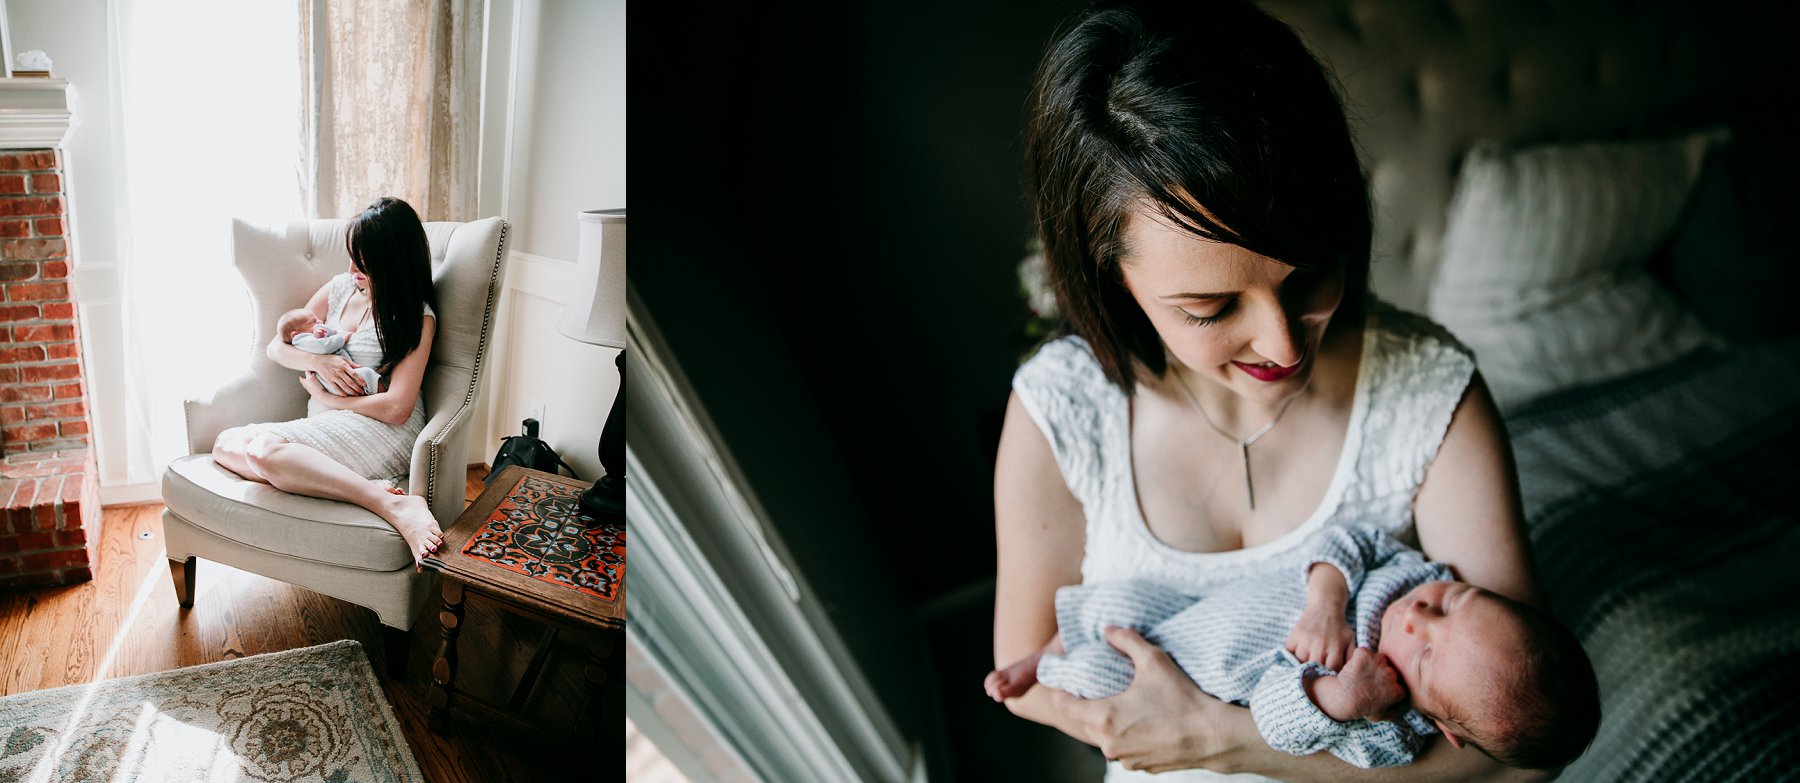 Kansas City Newborn Photography in Mission, Kansas by Merry Ohler (24)